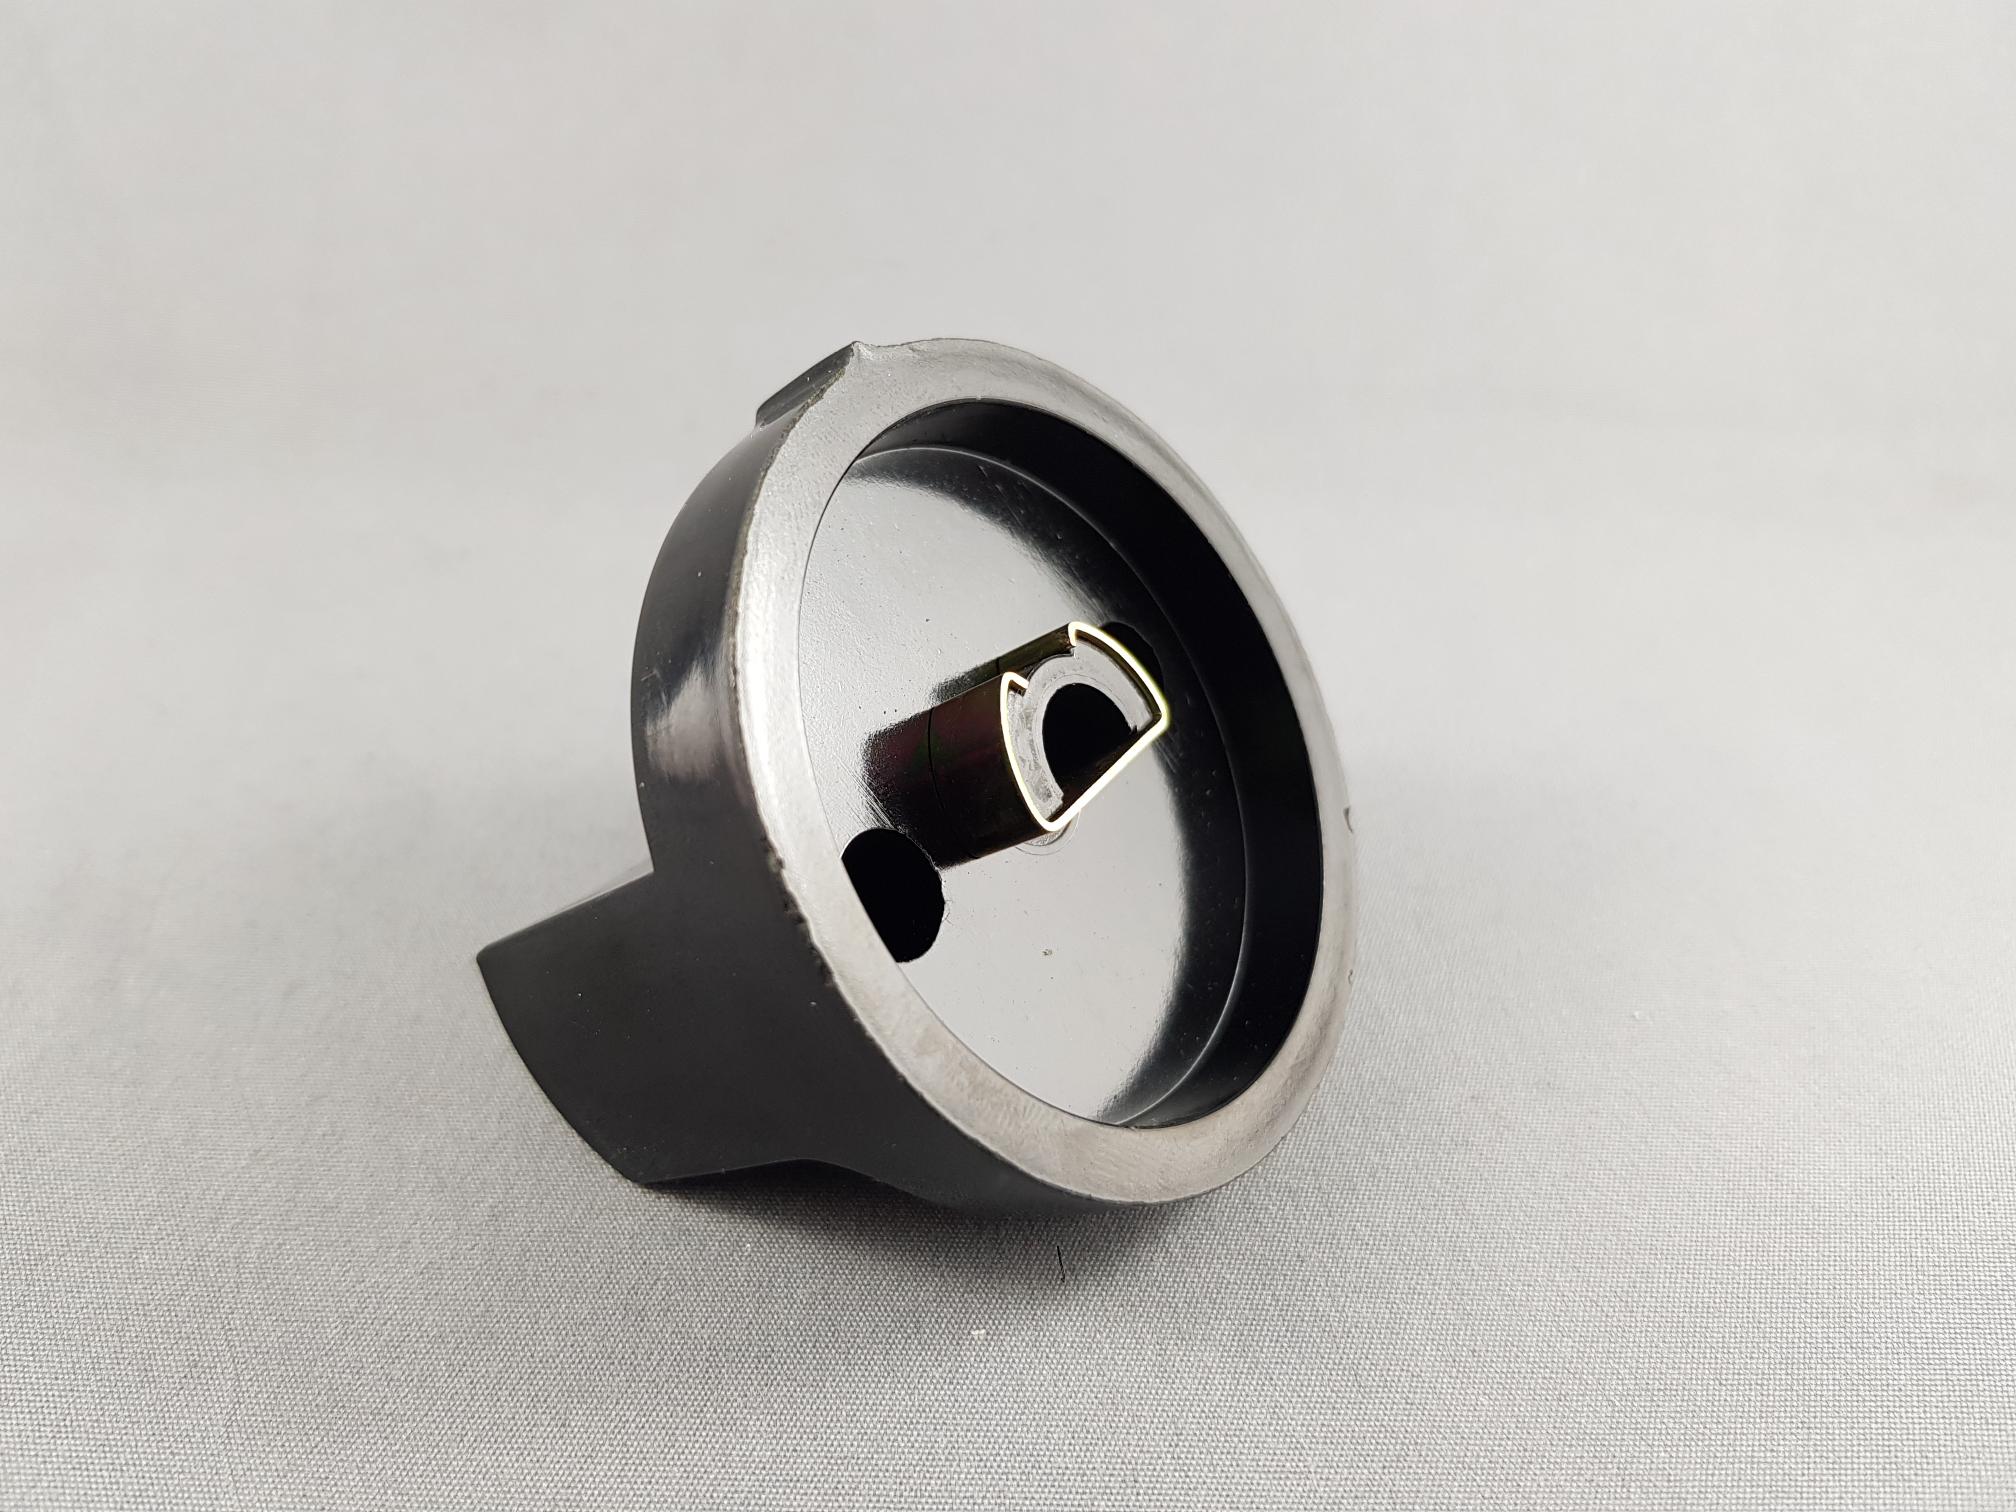 Commercial Style Round Black Knob 5/16 - Gameco